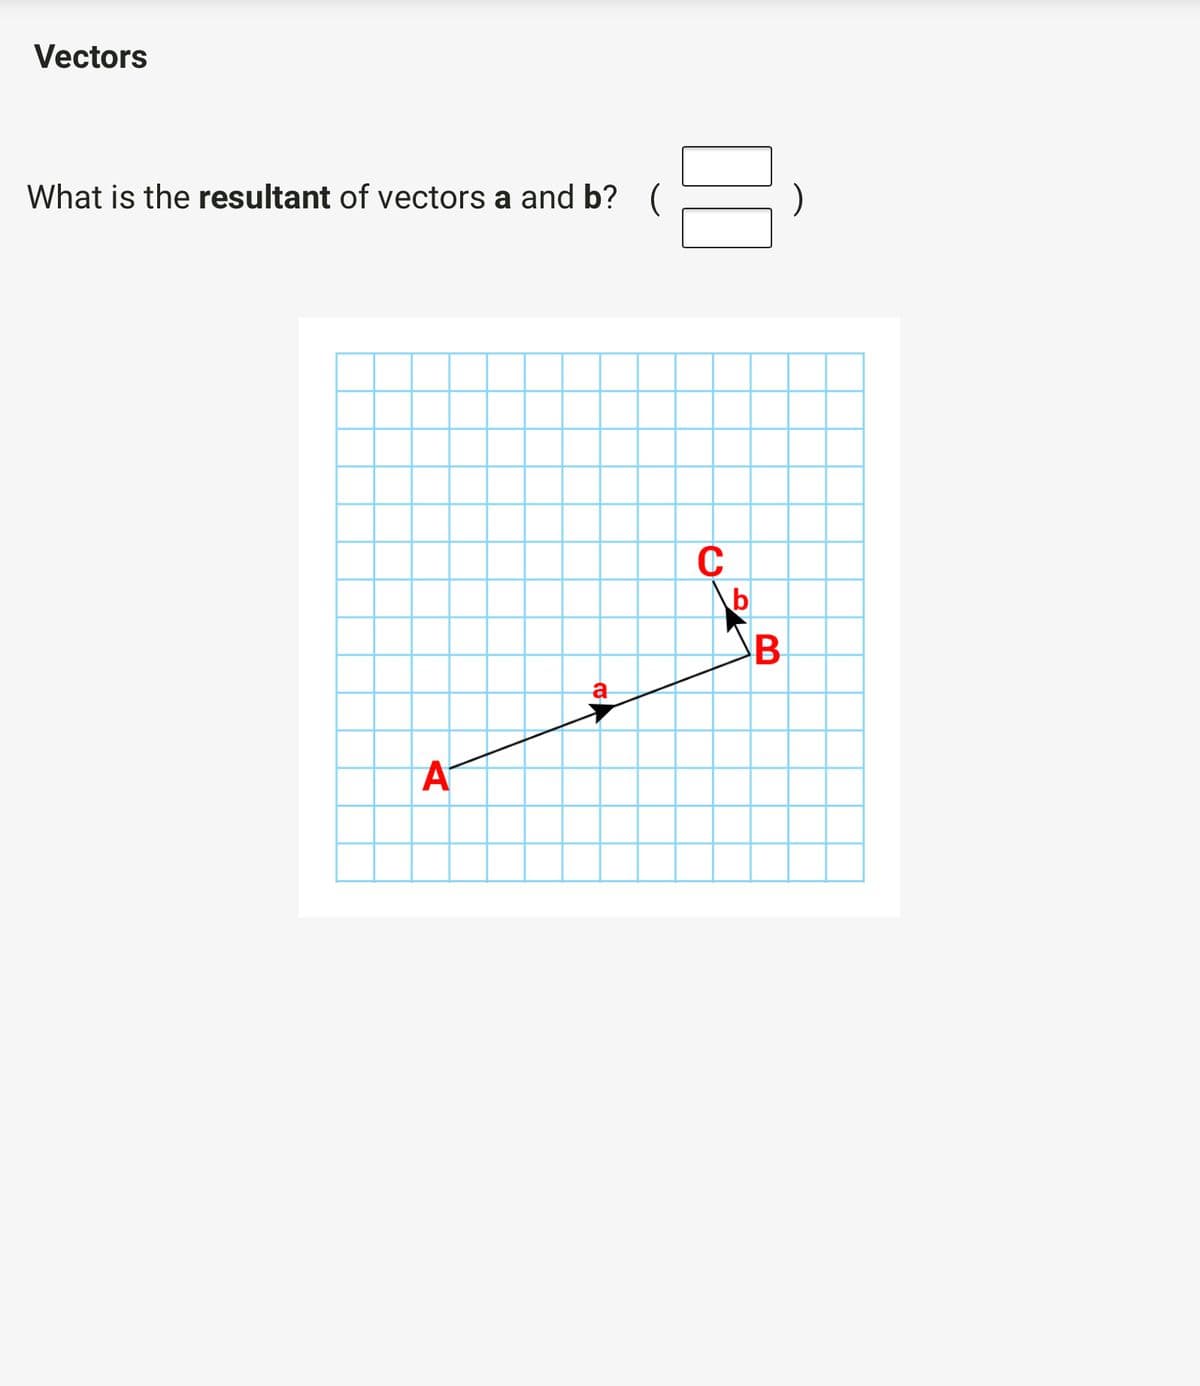 Vectors
What is the resultant of vectors a and b? (
b
A
